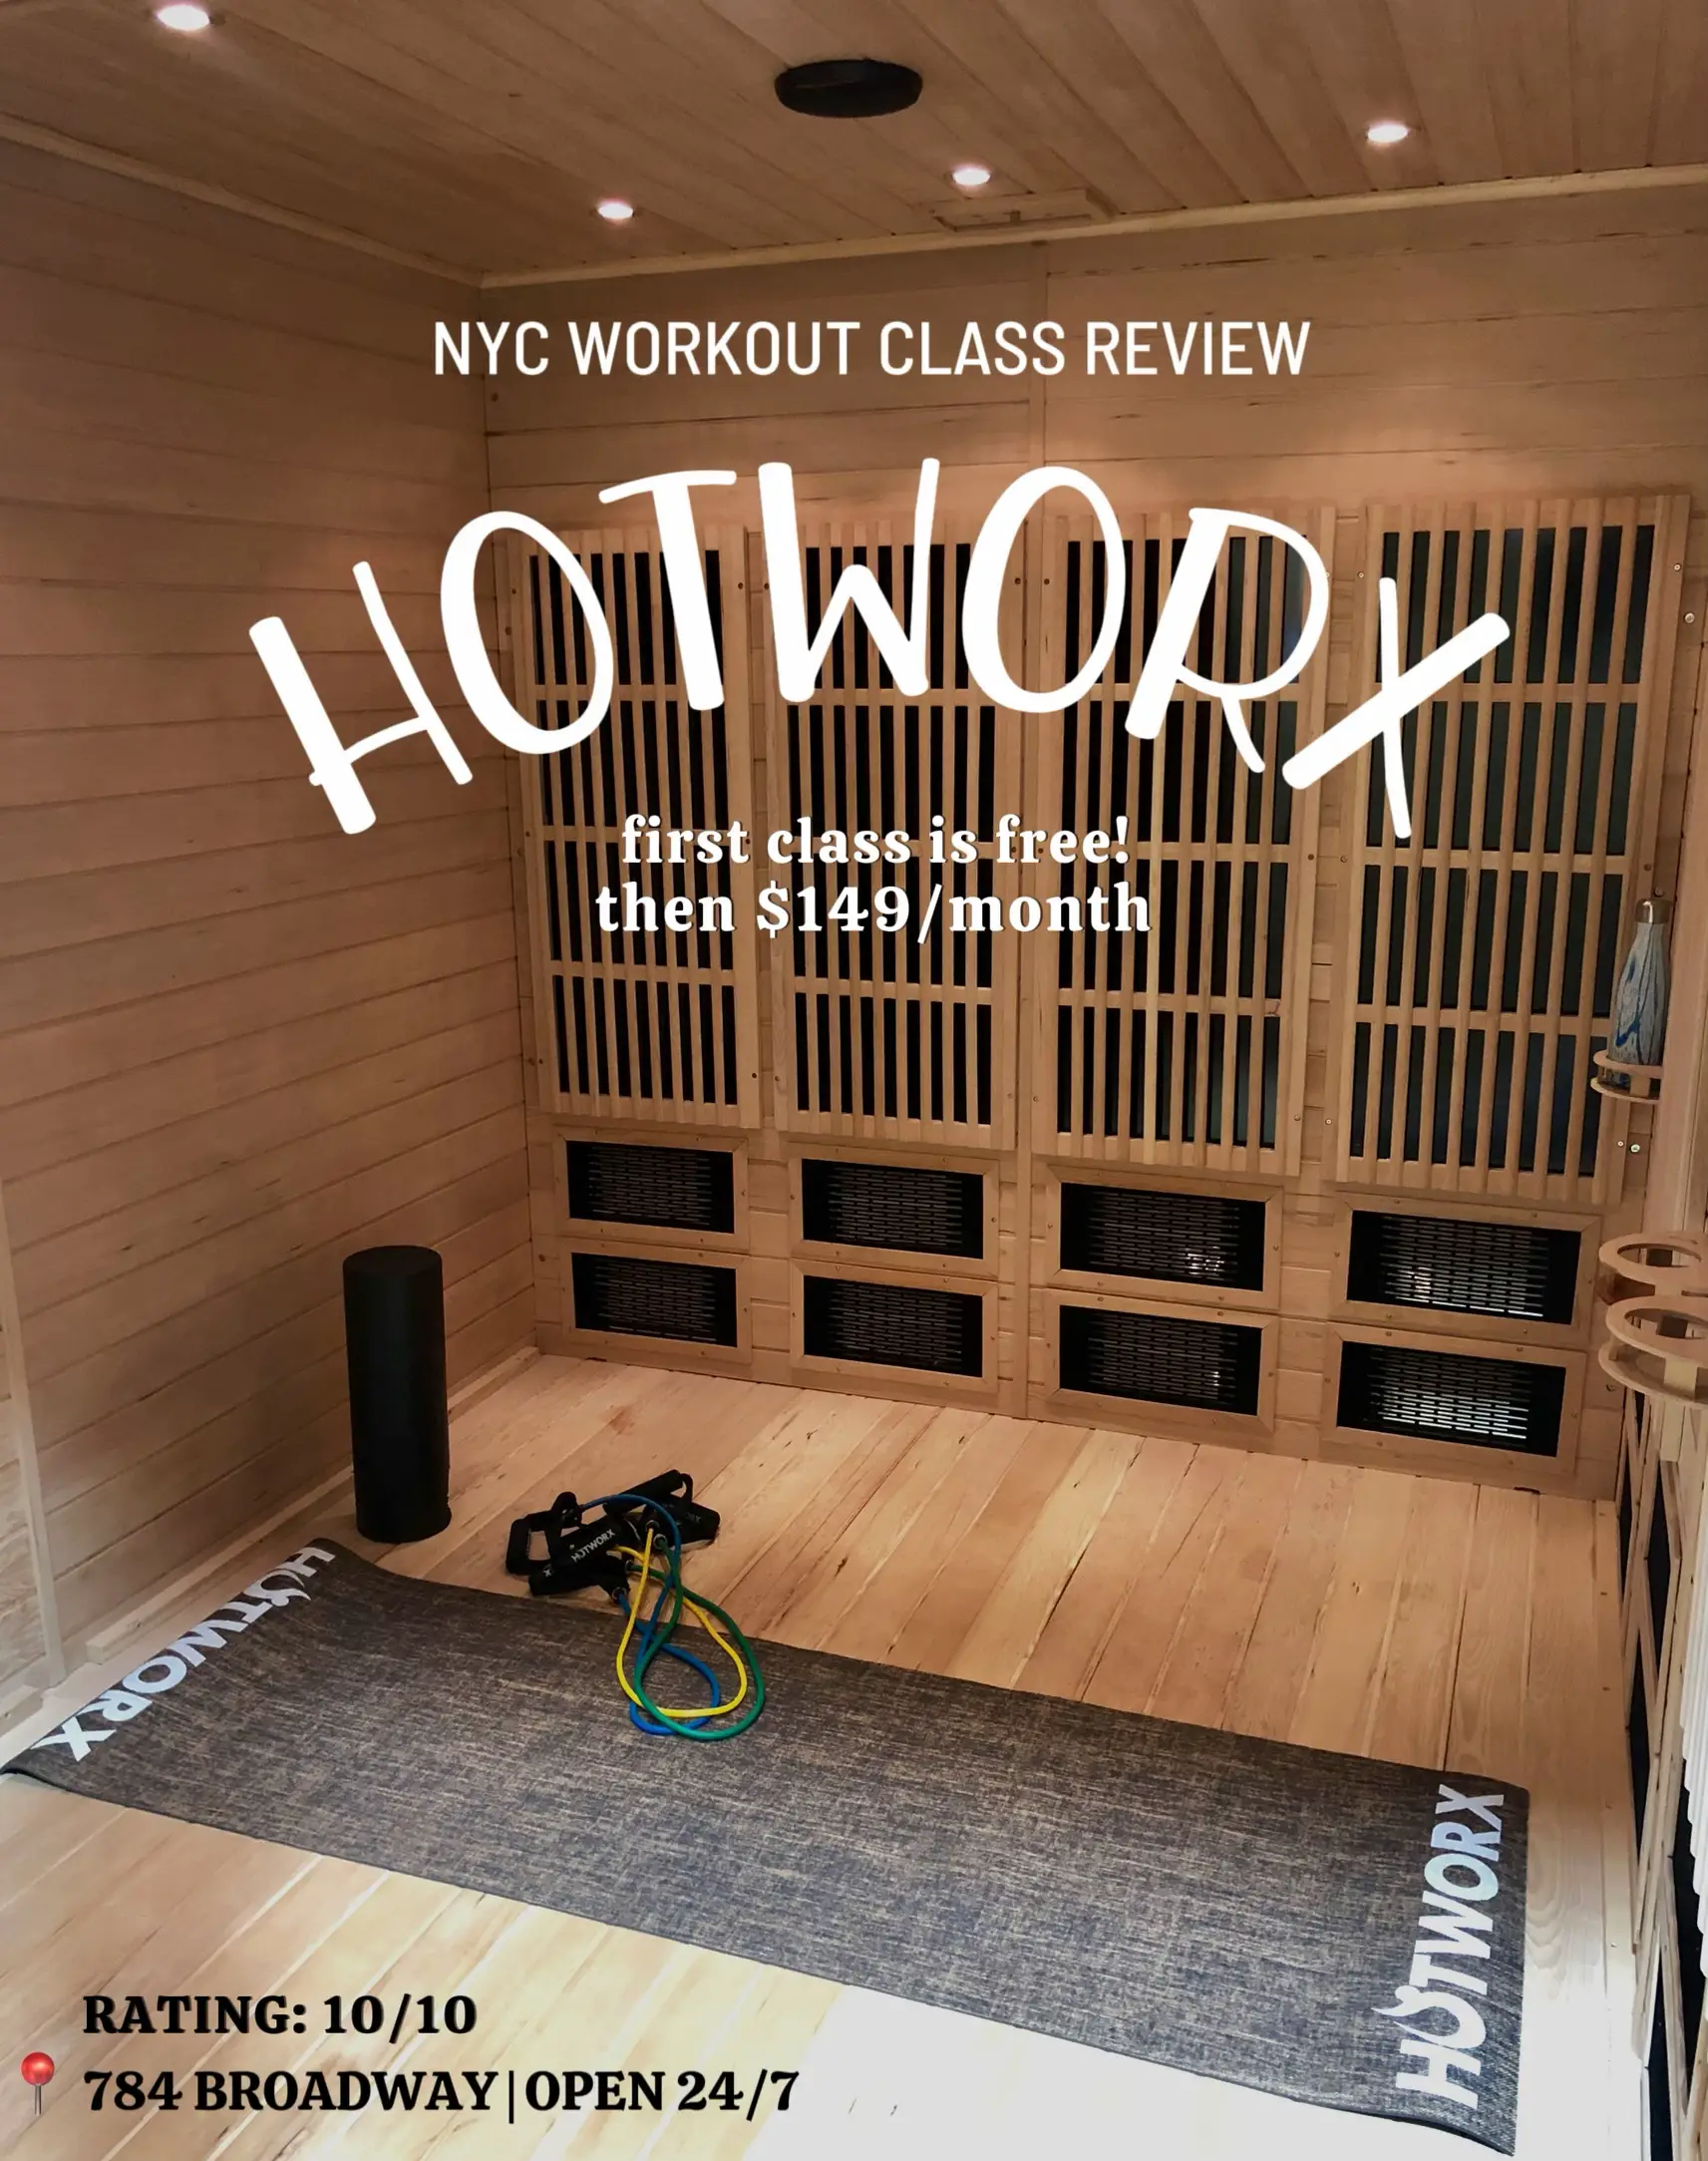 HOTWORX Arrives in NYC